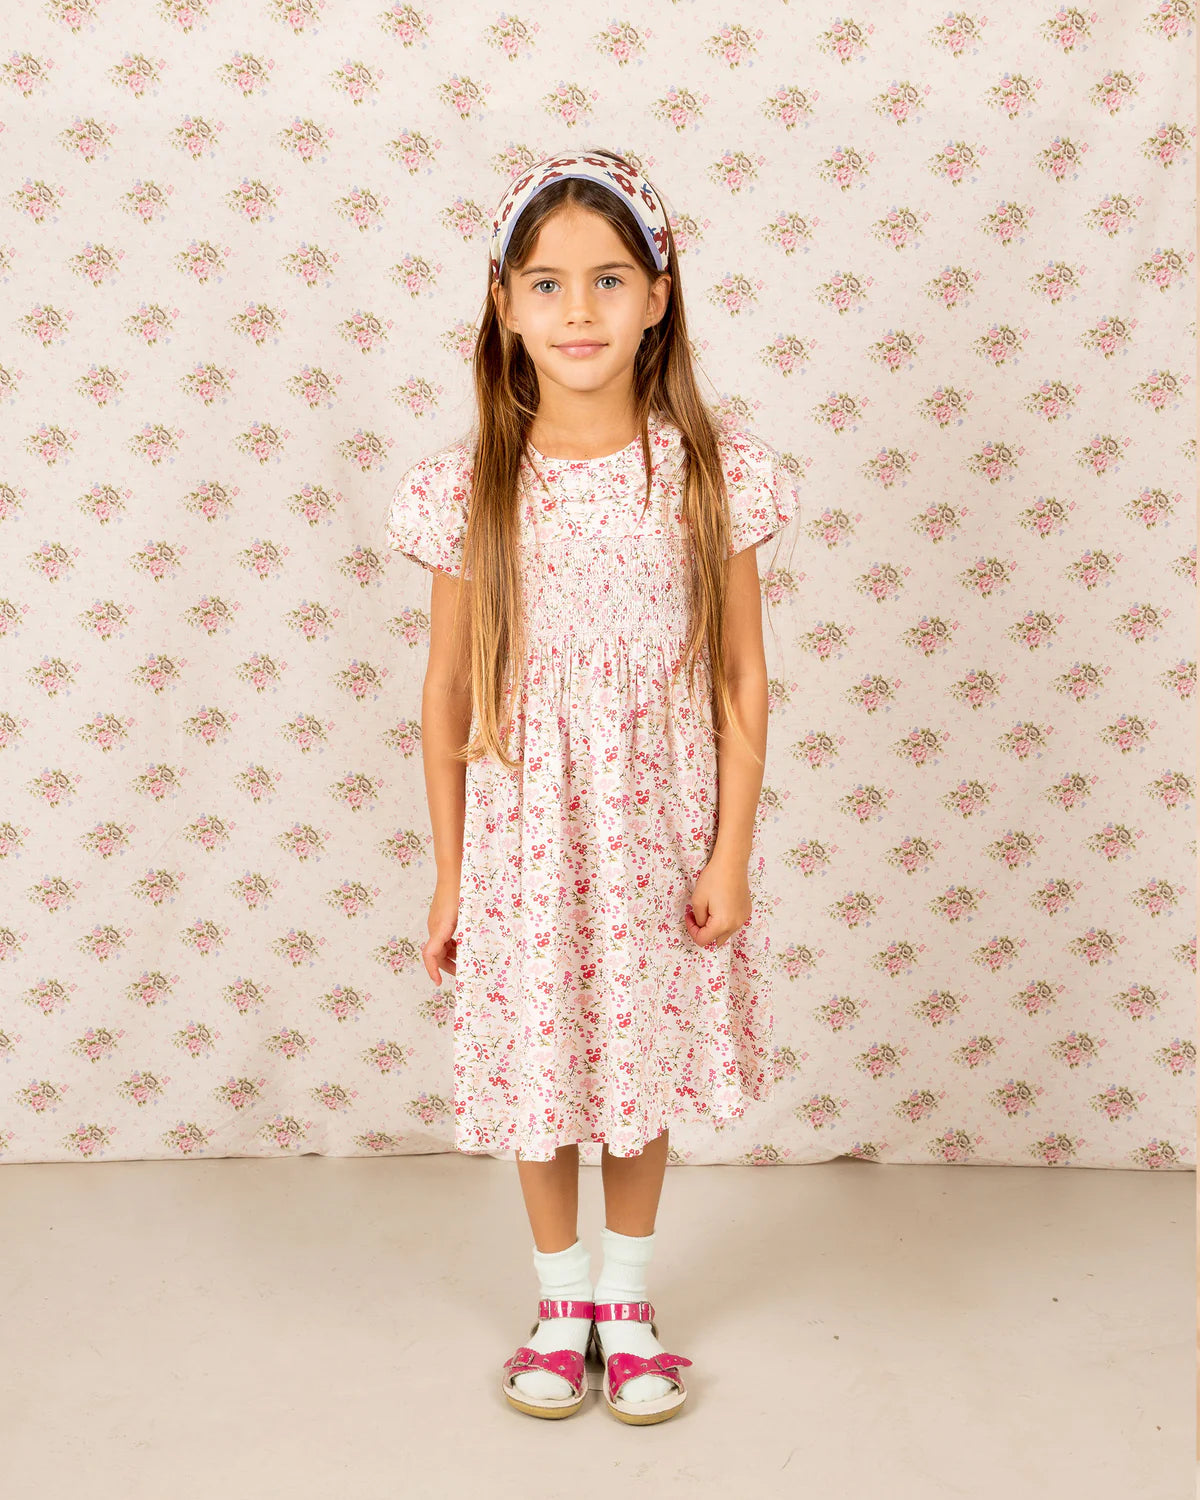 Mallery Smocked Dress (SS Pink Red Floral w Collar)